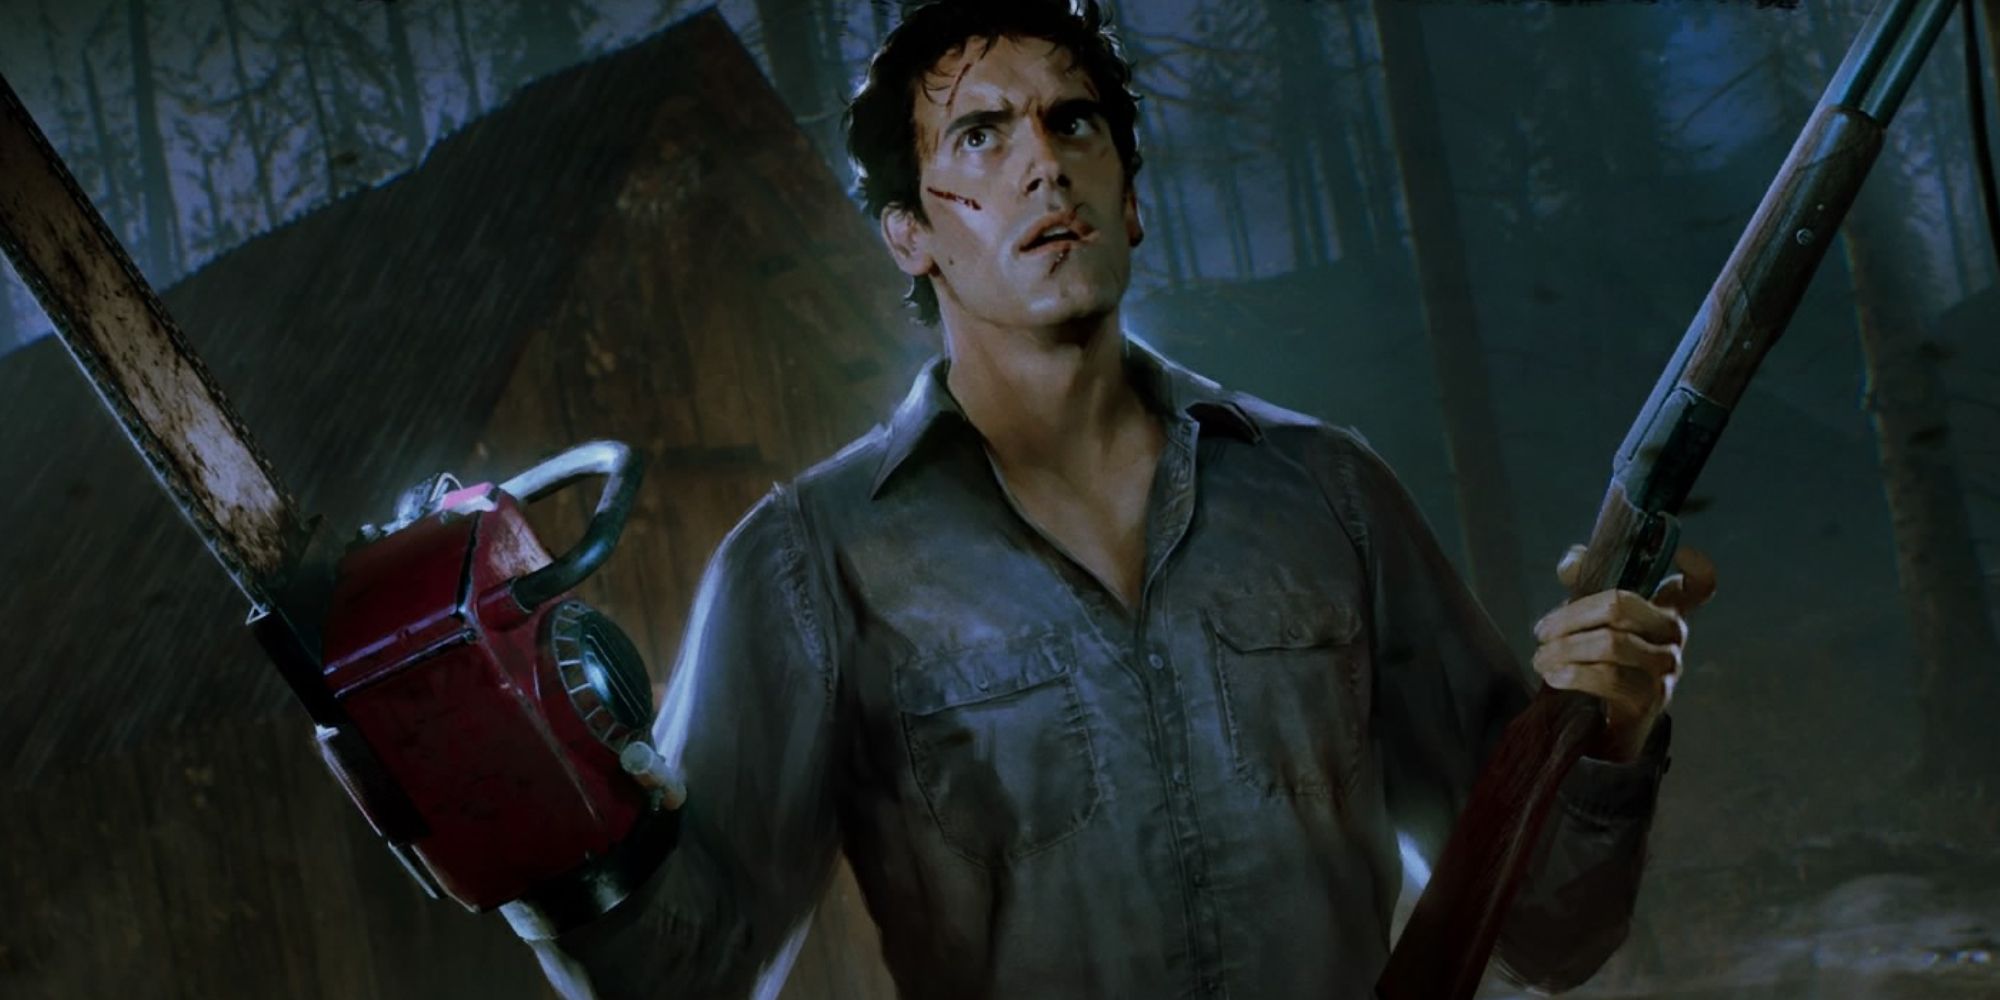 Beginner's Guide and Tips - Evil Dead: The Game Guide - IGN